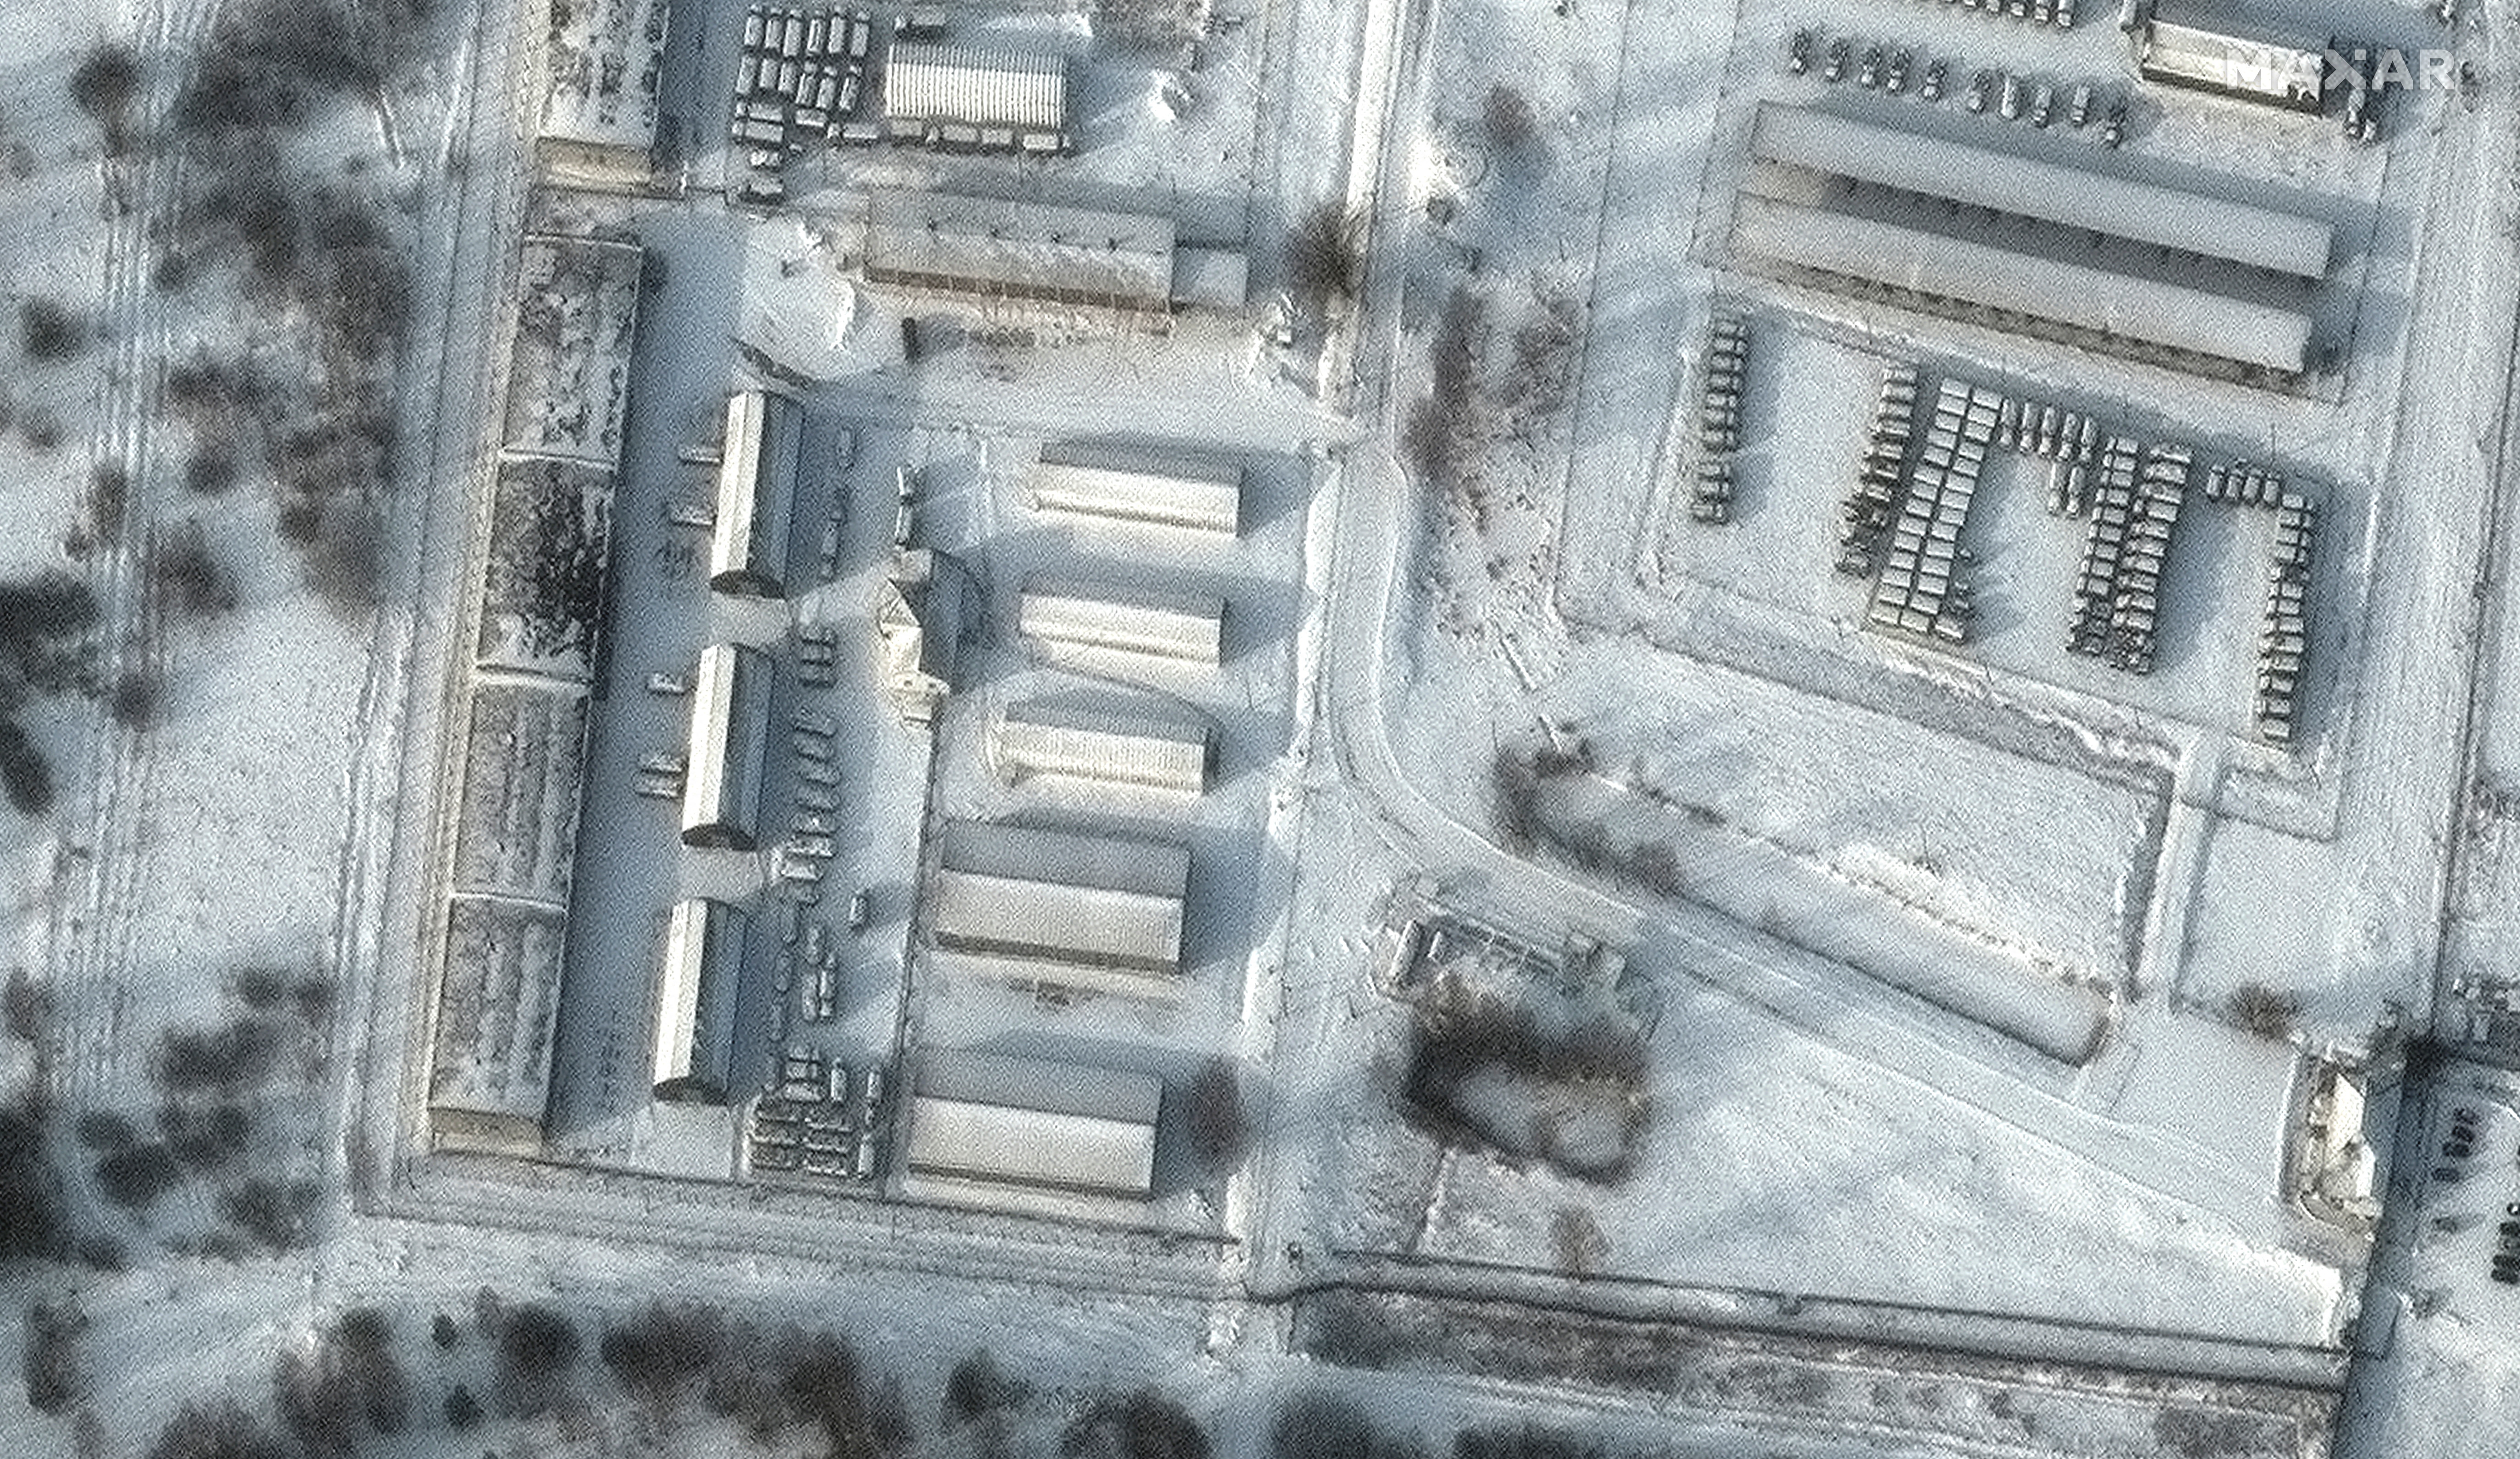 A satellite image shows armoured personnel carriers and trucks at Klimovo storage facility in Klimovo